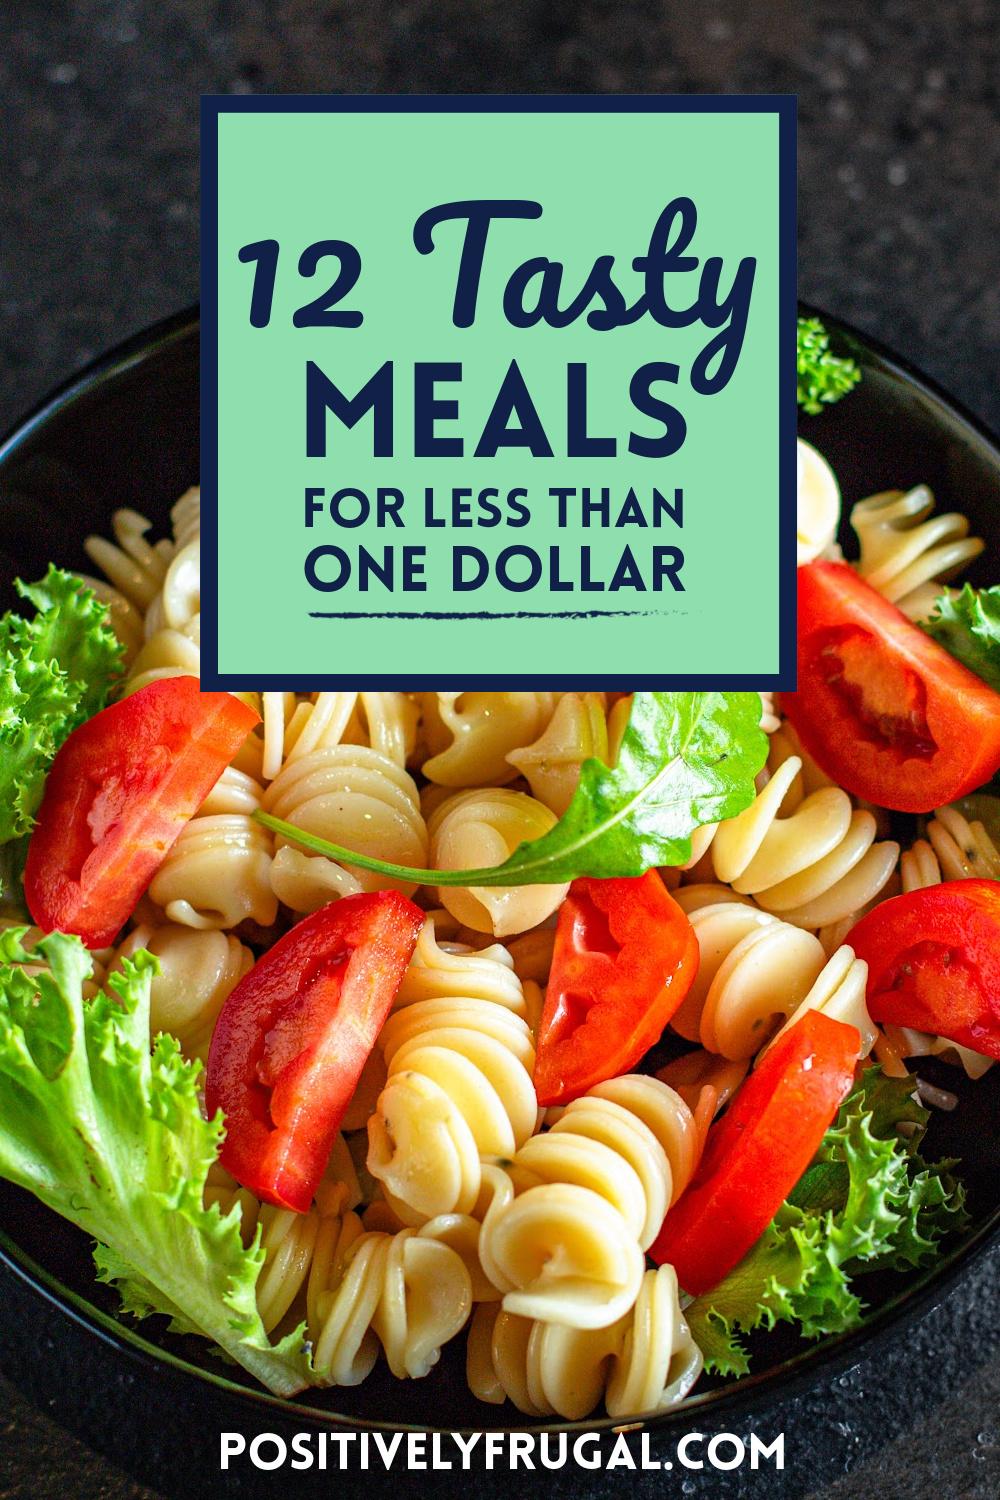 12 Tasty Meals for Less Than One Dollar by PositivelyFrugal.com